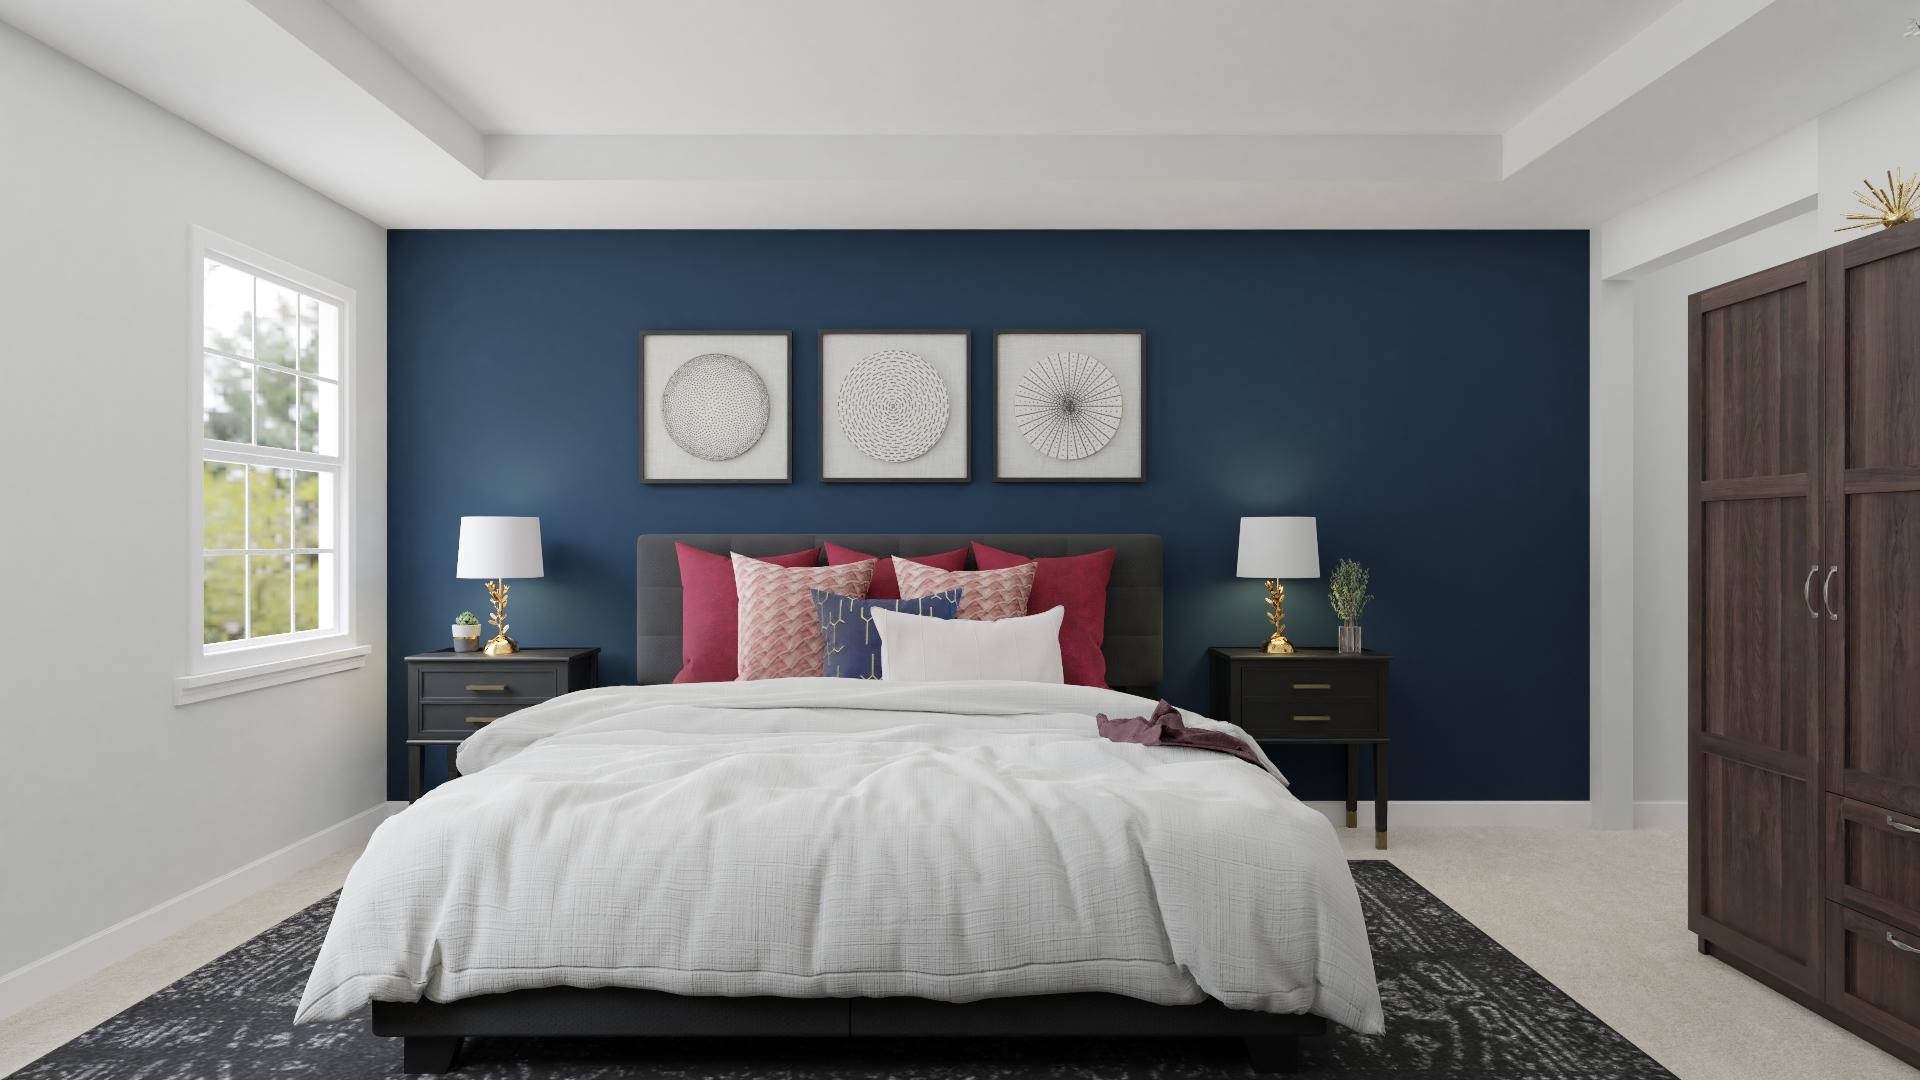 A Transitional Glam Bedroom With Jewel-Tones